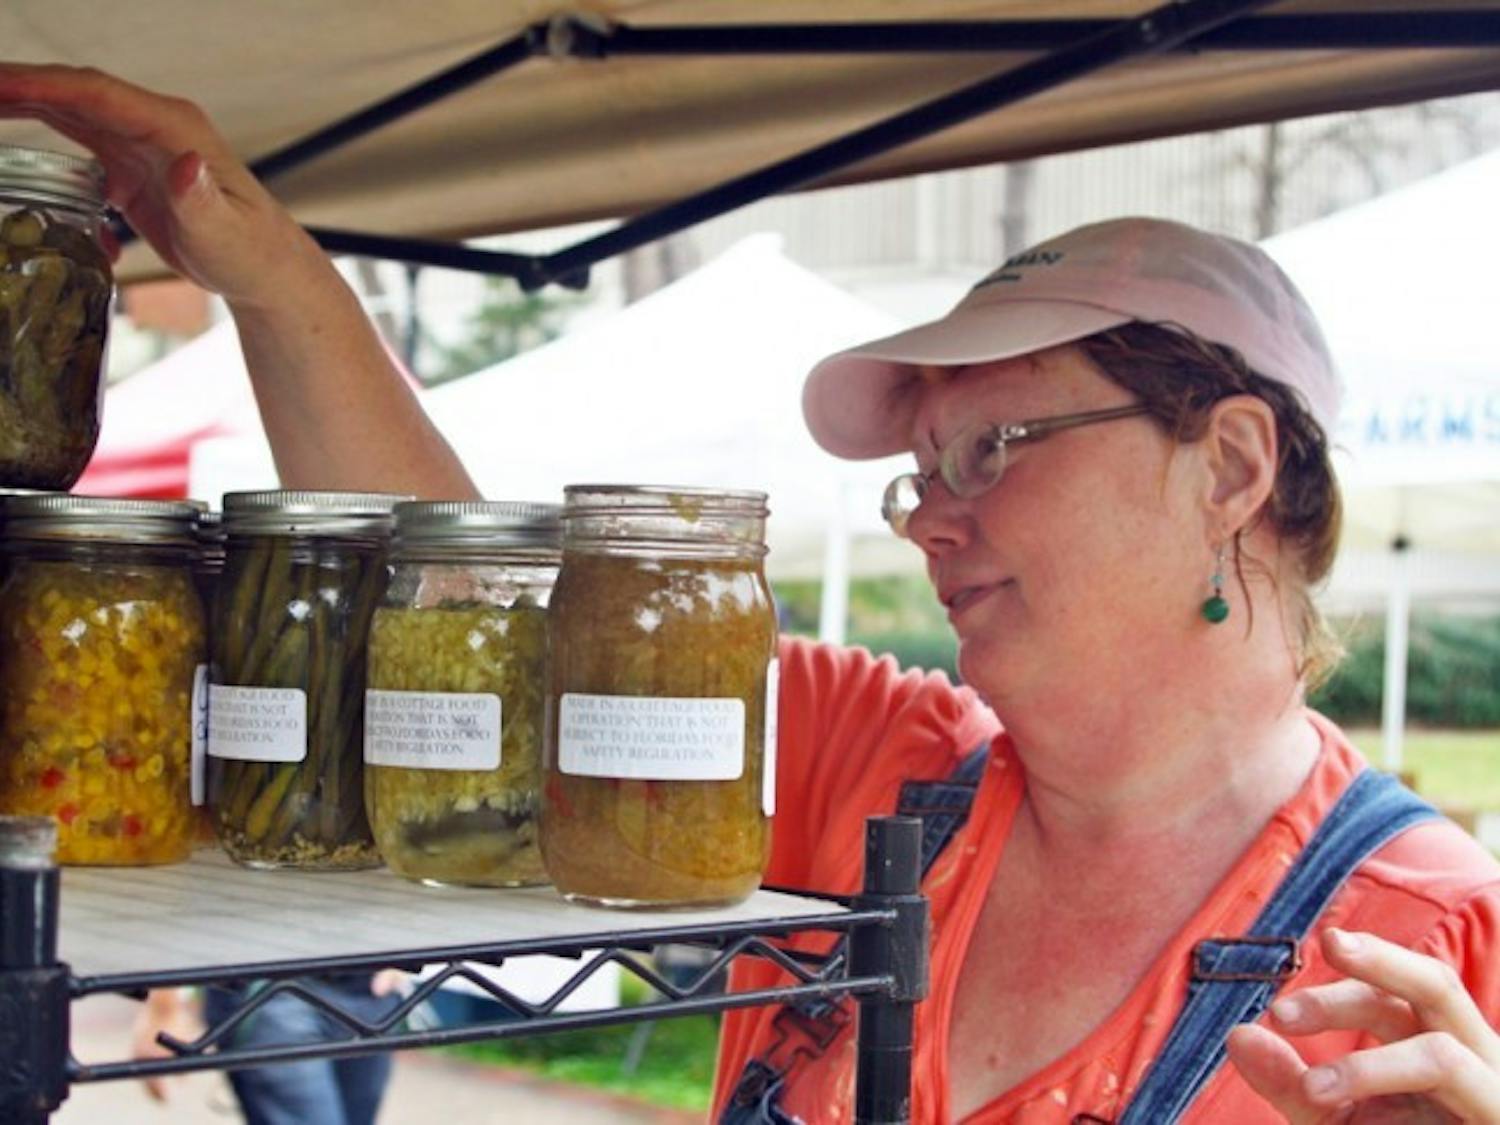 Robin Stahr sets up her table for the farmers market on the North Lawn near the Reitz Union on Friday. Stahr's business sells scones, jams, pickled vegetables, local honey and more.